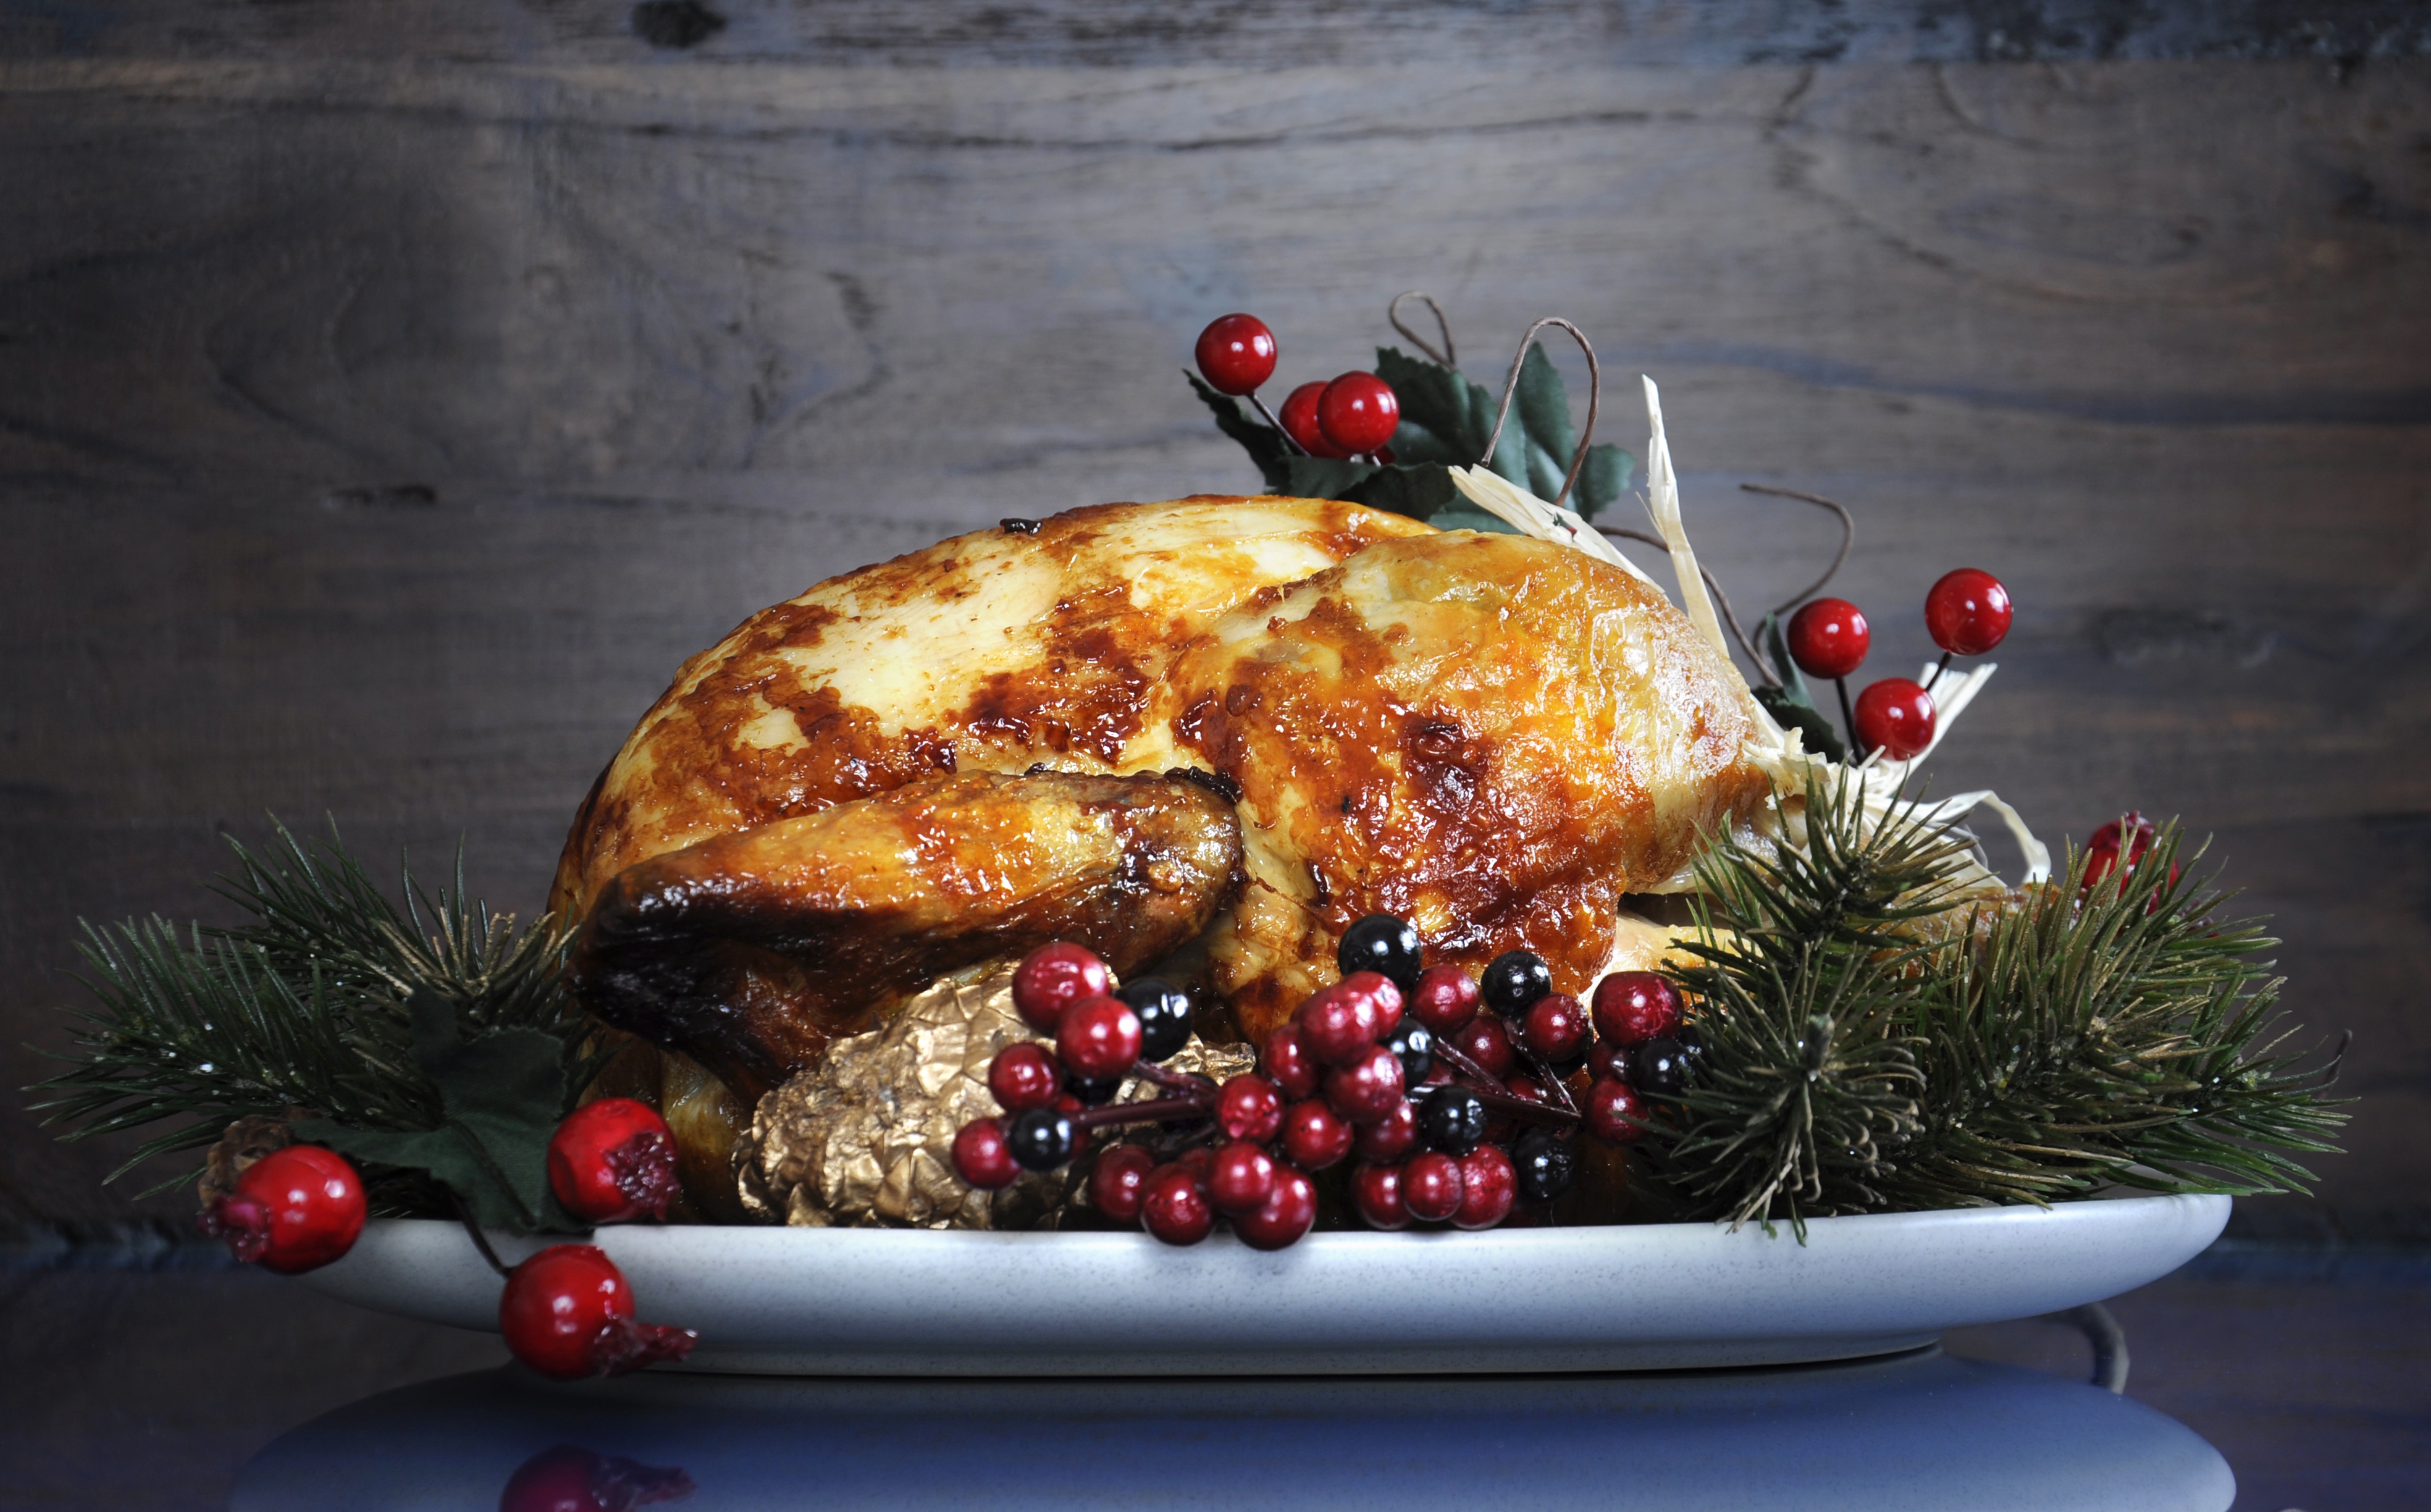 Healthy Holiday Eating with Cancer